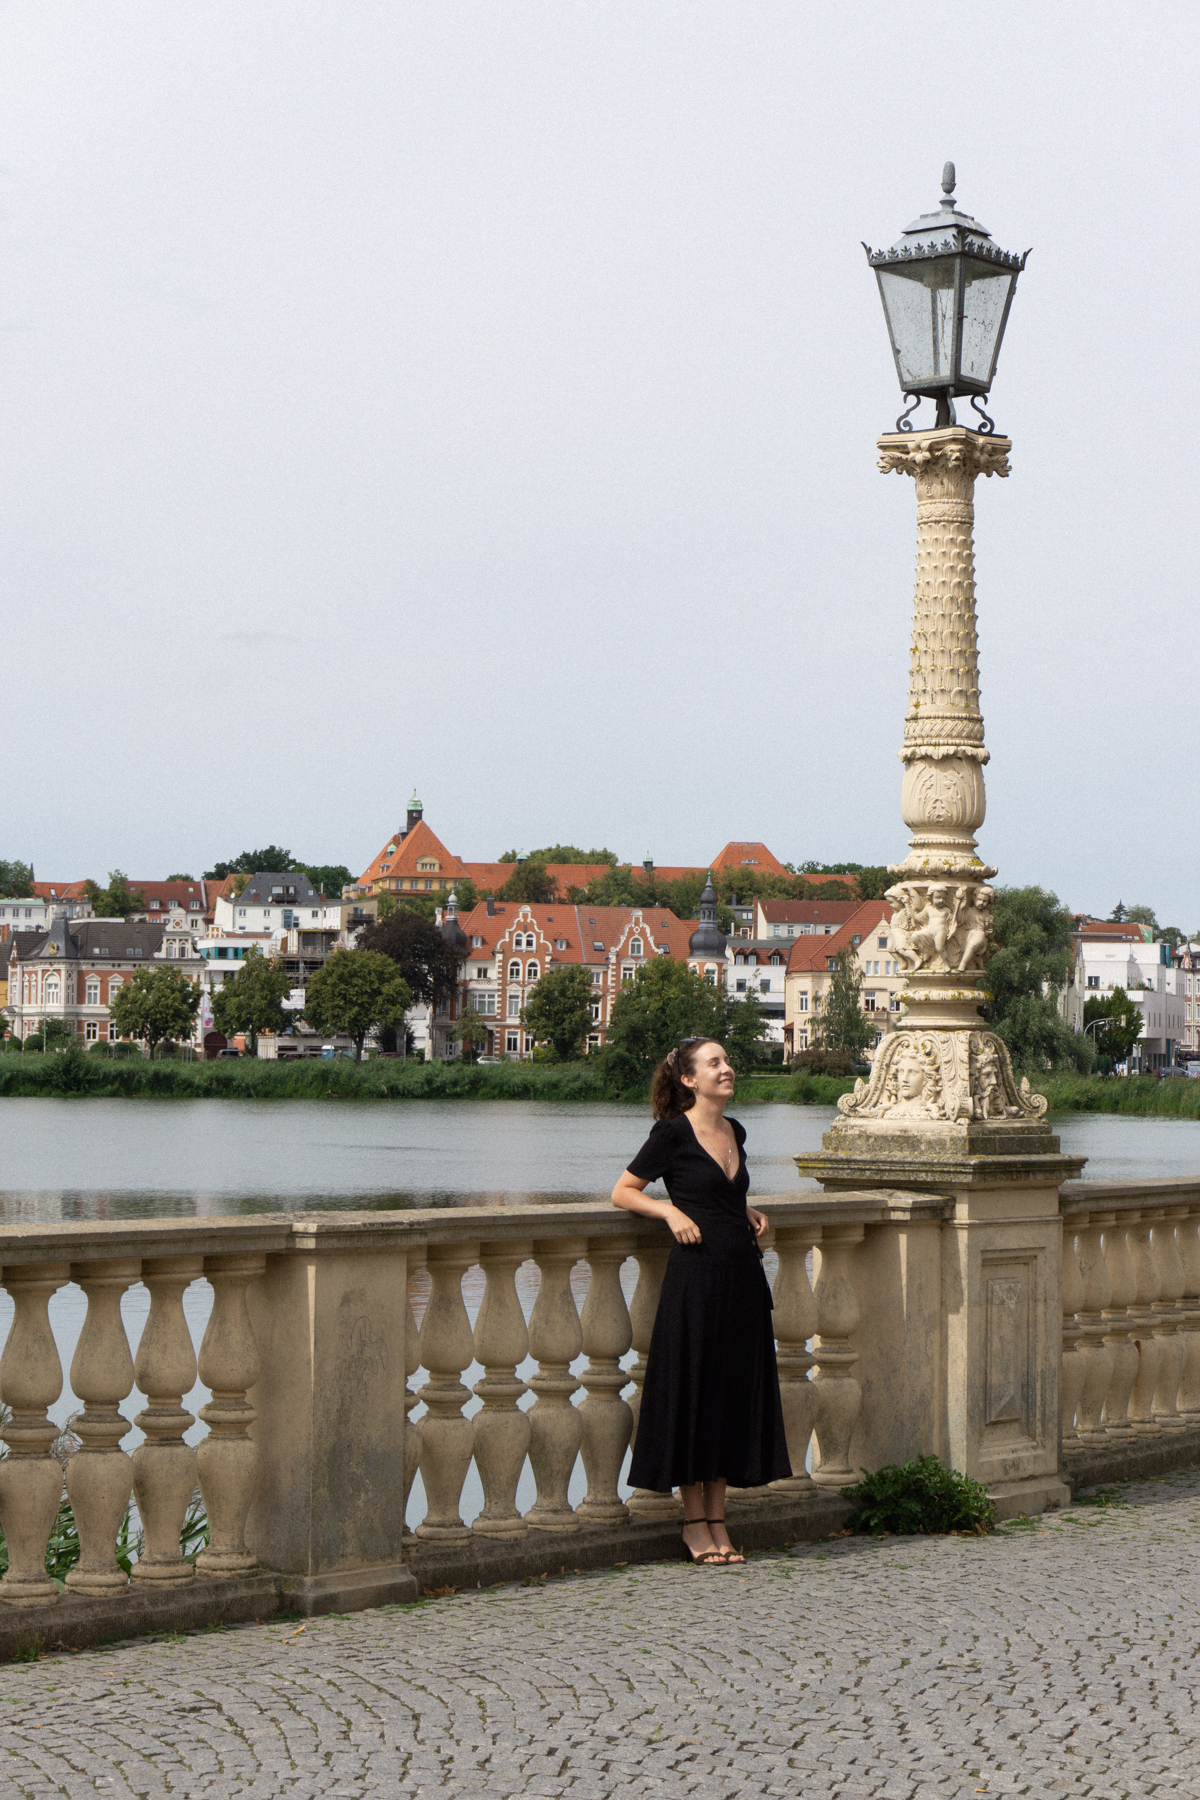 & Other Stories Dress ~ Summer Style, Schwerin Castle ~ a Day Trip from Berlin Germany / RG Daily Travel Guide